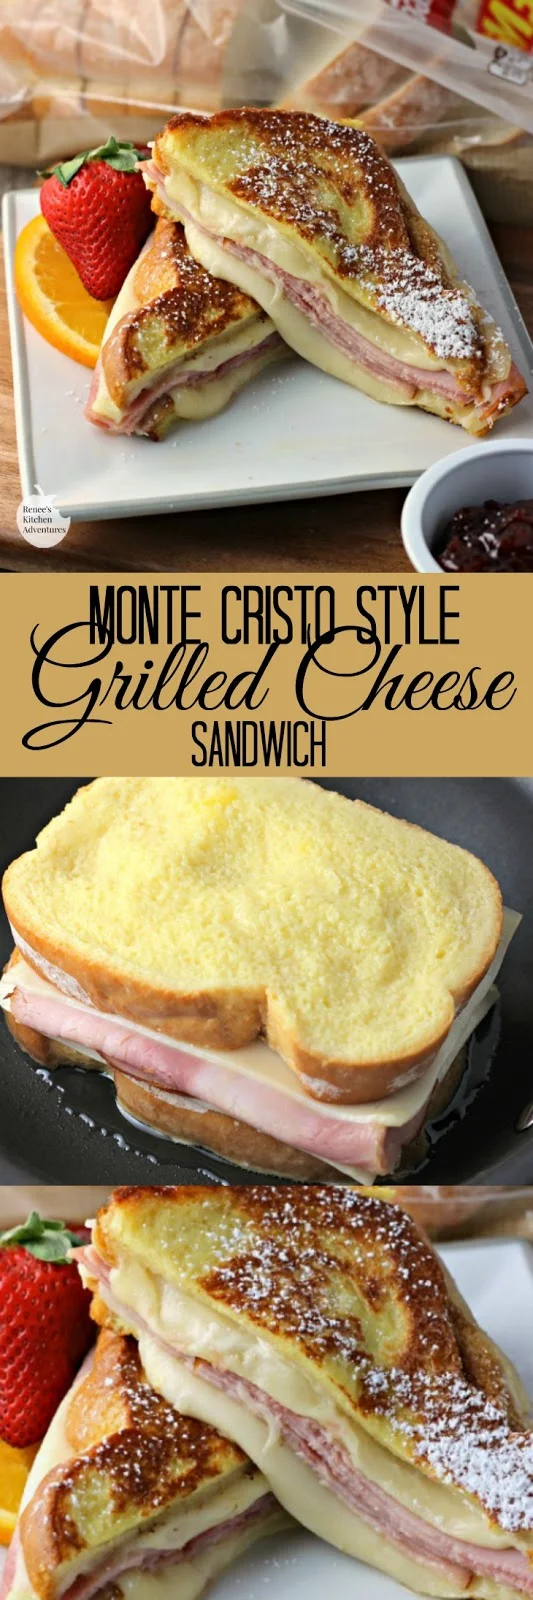 Monte Cristo Style Grilled Cheese Sandwich | by Renee's Kitchen Adventures - easy recipe for sweet and savory grilled cheese sandwich with ham and swiss. Great for lunch or dinner. AD ArtesanoBread